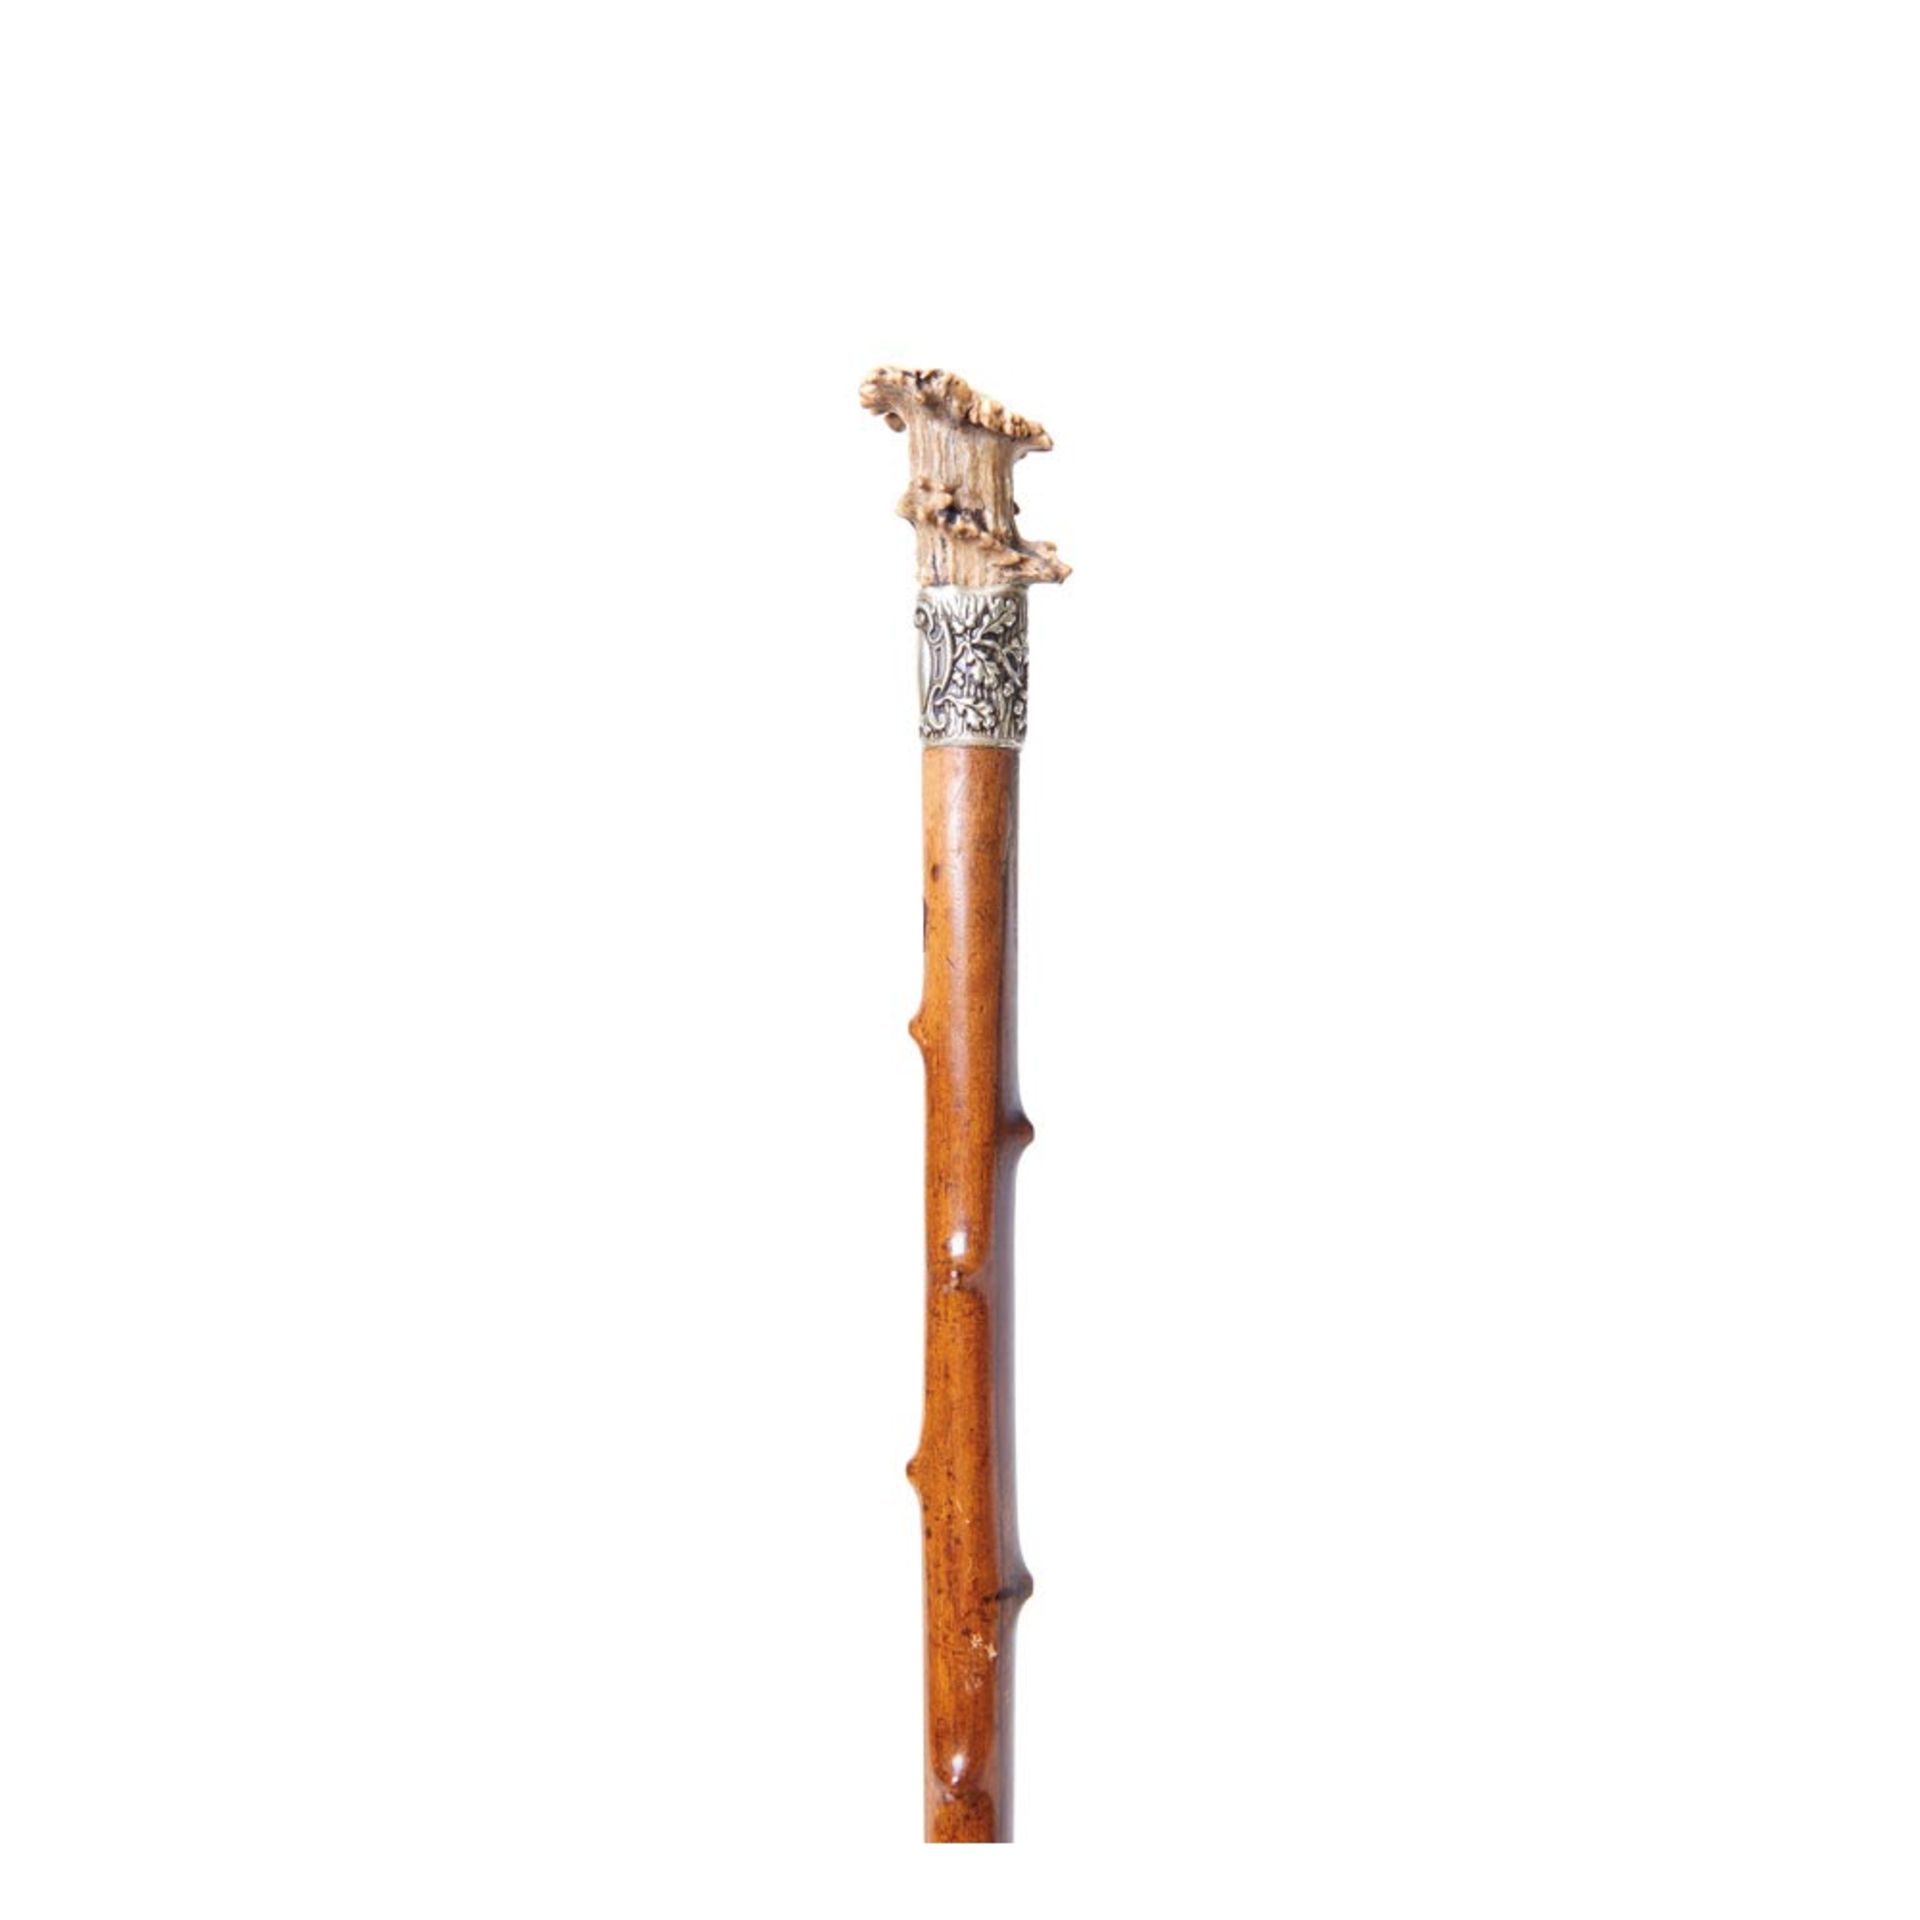 Horn and wood walking stick